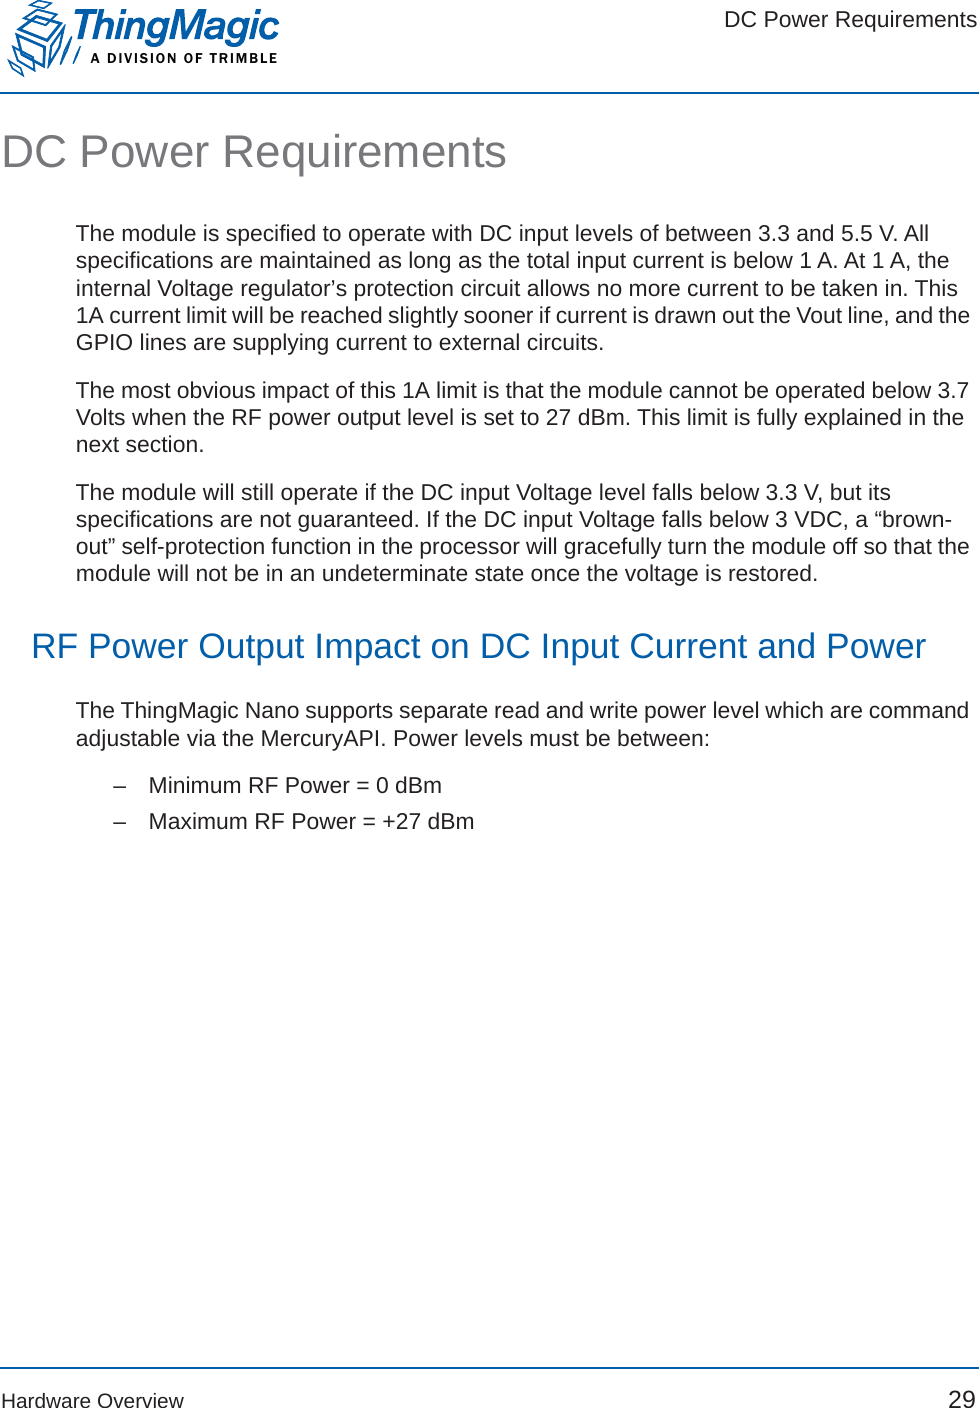 DC Power RequirementsA DIVISION OF TRIMBLEHardware Overview 29DC Power RequirementsThe module is specified to operate with DC input levels of between 3.3 and 5.5 V. All specifications are maintained as long as the total input current is below 1 A. At 1 A, the internal Voltage regulator’s protection circuit allows no more current to be taken in. This 1A current limit will be reached slightly sooner if current is drawn out the Vout line, and the GPIO lines are supplying current to external circuits. The most obvious impact of this 1A limit is that the module cannot be operated below 3.7 Volts when the RF power output level is set to 27 dBm. This limit is fully explained in the next section.The module will still operate if the DC input Voltage level falls below 3.3 V, but its specifications are not guaranteed. If the DC input Voltage falls below 3 VDC, a “brown-out” self-protection function in the processor will gracefully turn the module off so that the module will not be in an undeterminate state once the voltage is restored. RF Power Output Impact on DC Input Current and PowerThe ThingMagic Nano supports separate read and write power level which are command adjustable via the MercuryAPI. Power levels must be between:–   Minimum RF Power = 0 dBm–   Maximum RF Power = +27 dBm